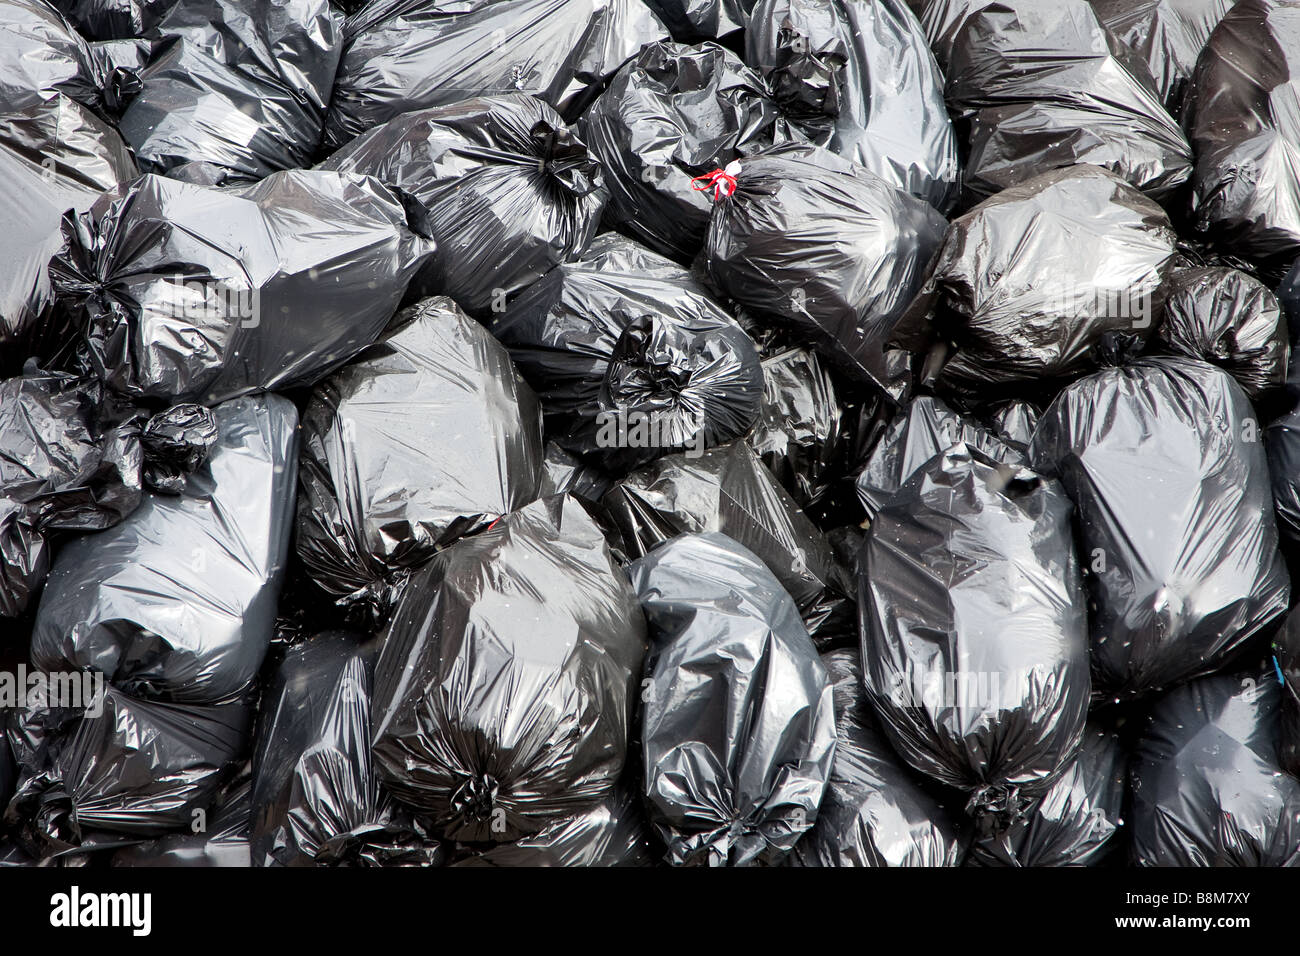 https://c8.alamy.com/comp/B8M7XY/a-pile-of-black-garbage-bags-with-tons-of-trash-B8M7XY.jpg